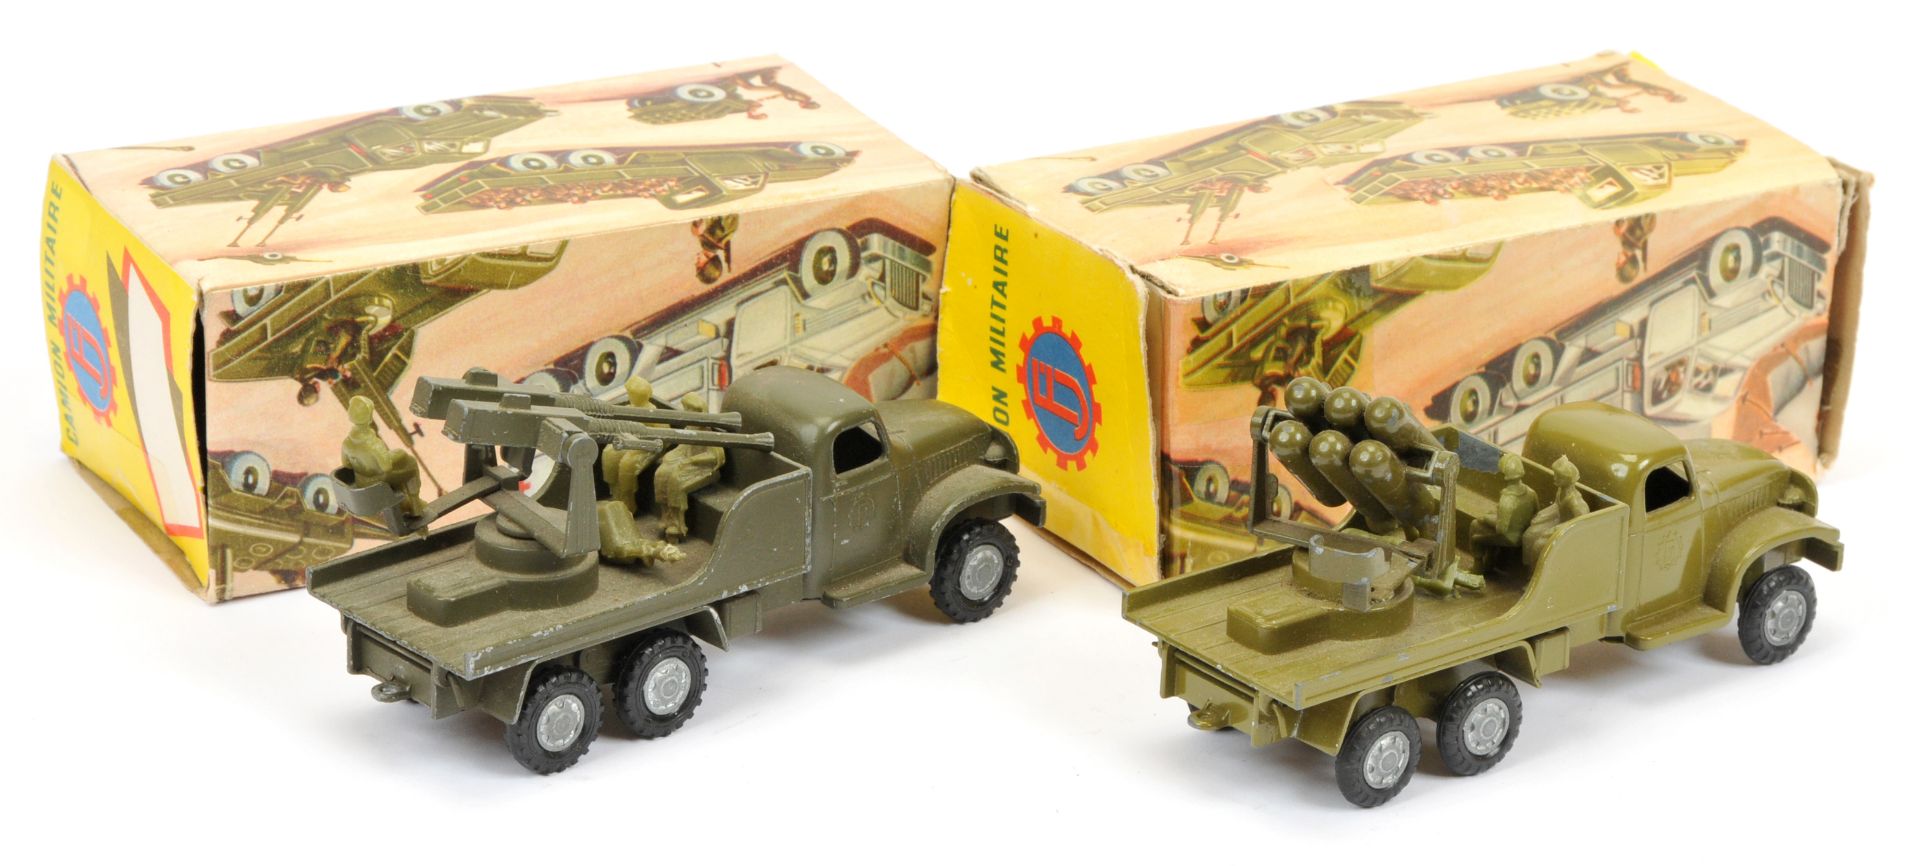 FJ military a pair -  GMC truck with rocket launcher - olive green and with Anti-Aircraft guns - Bild 2 aus 2